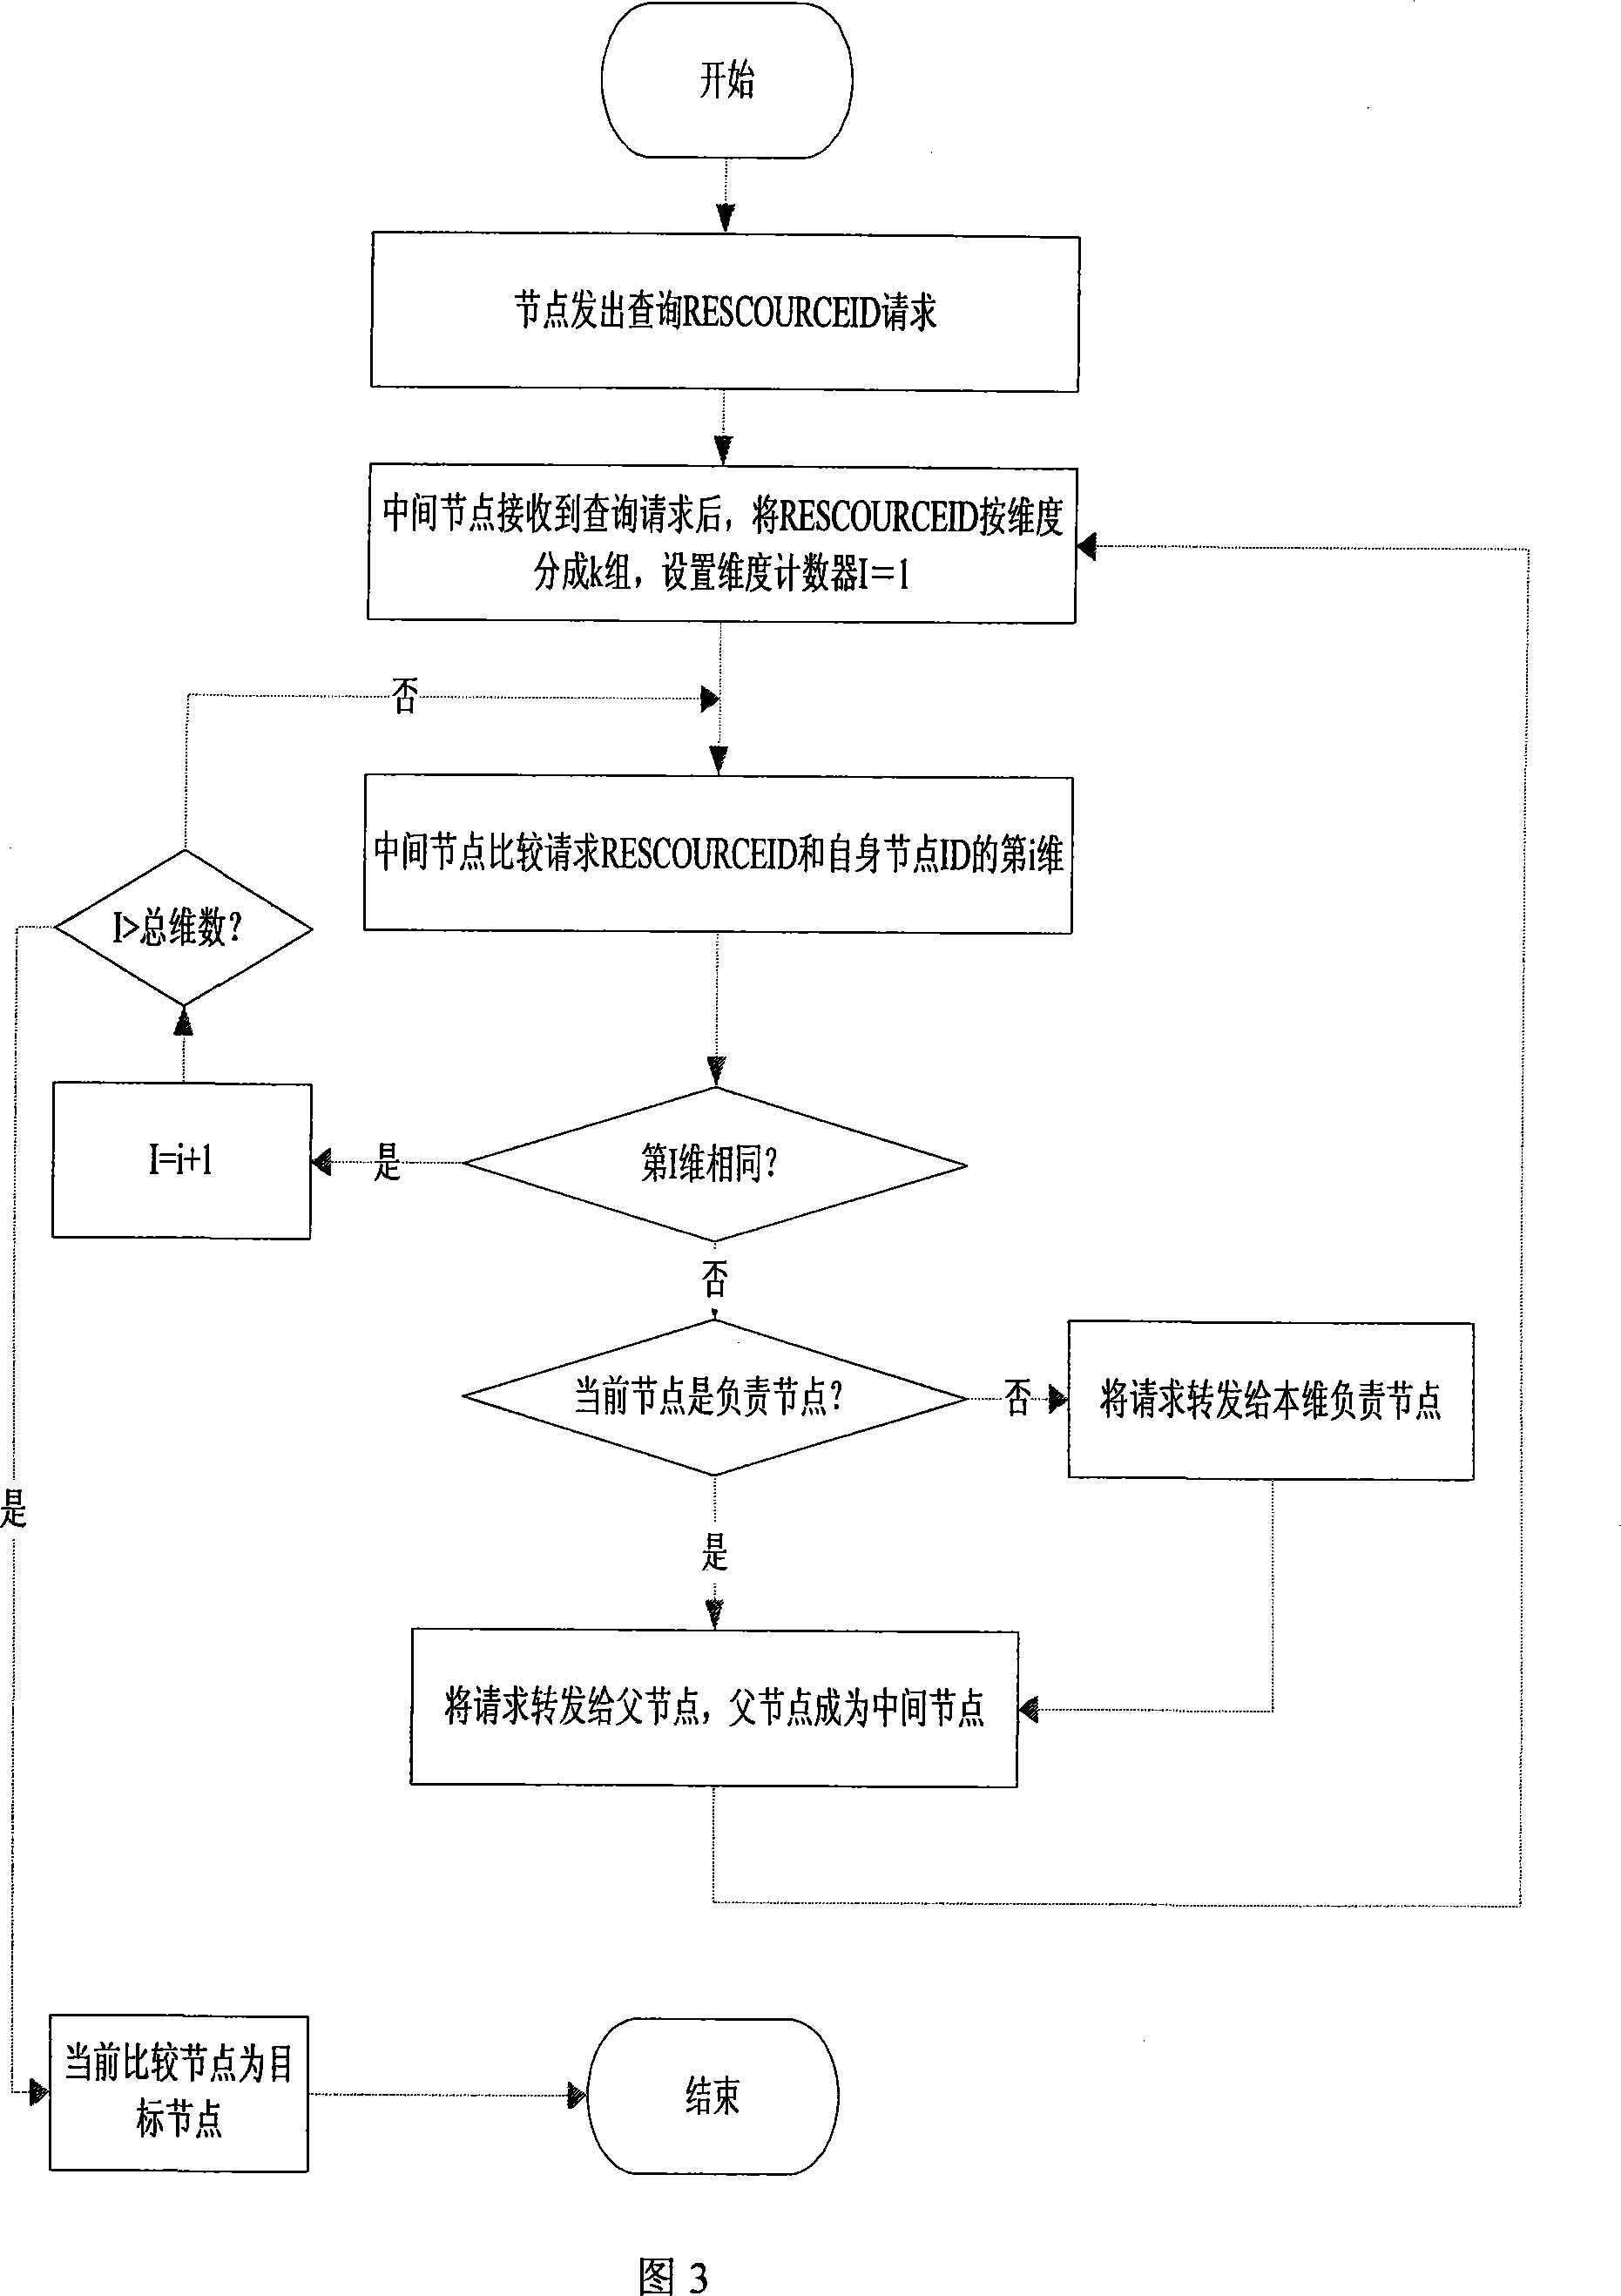 Peer network secure routing method based on multi-dimension distributed hash table